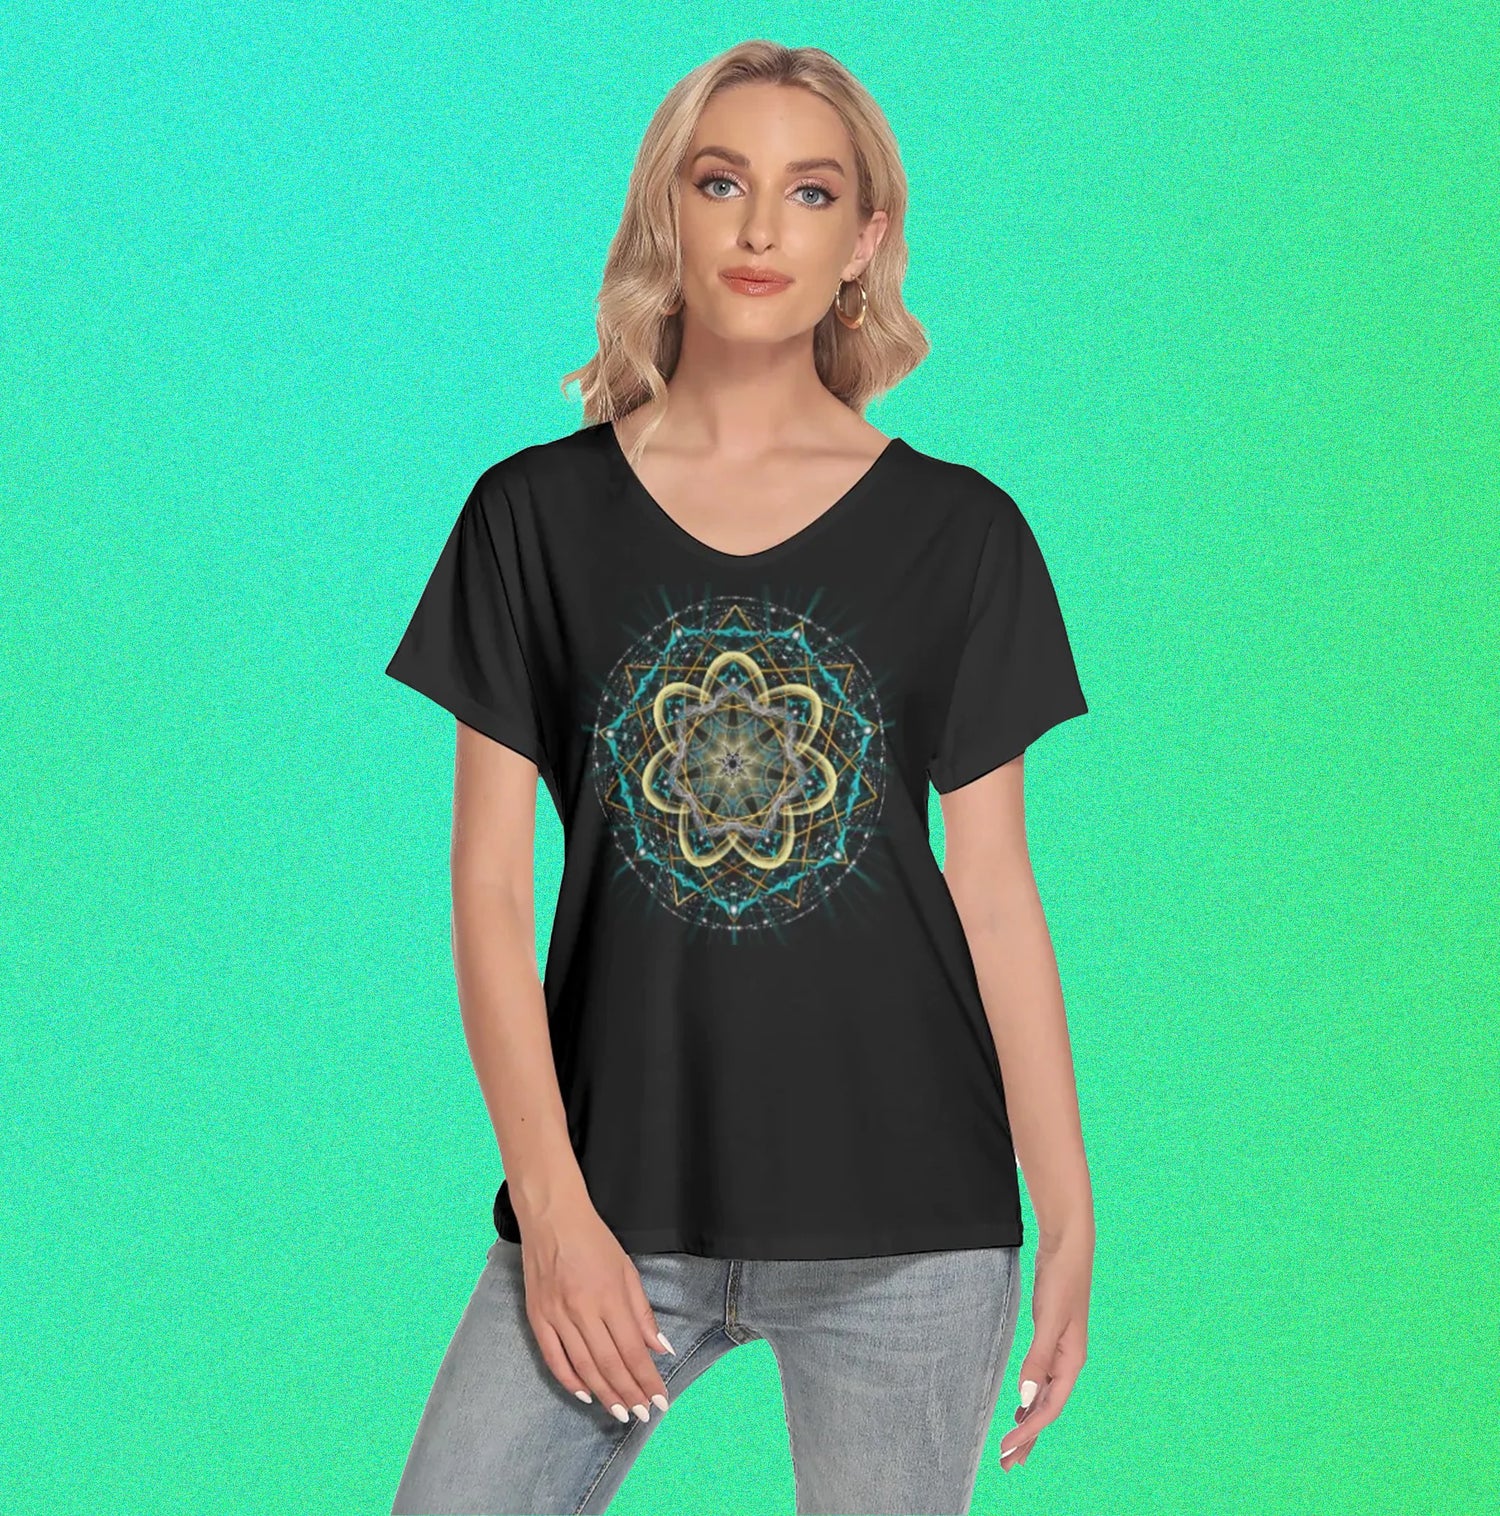 Psychedelic Visions: Clothing, Home Decor, Art Prints, and Accessories ...